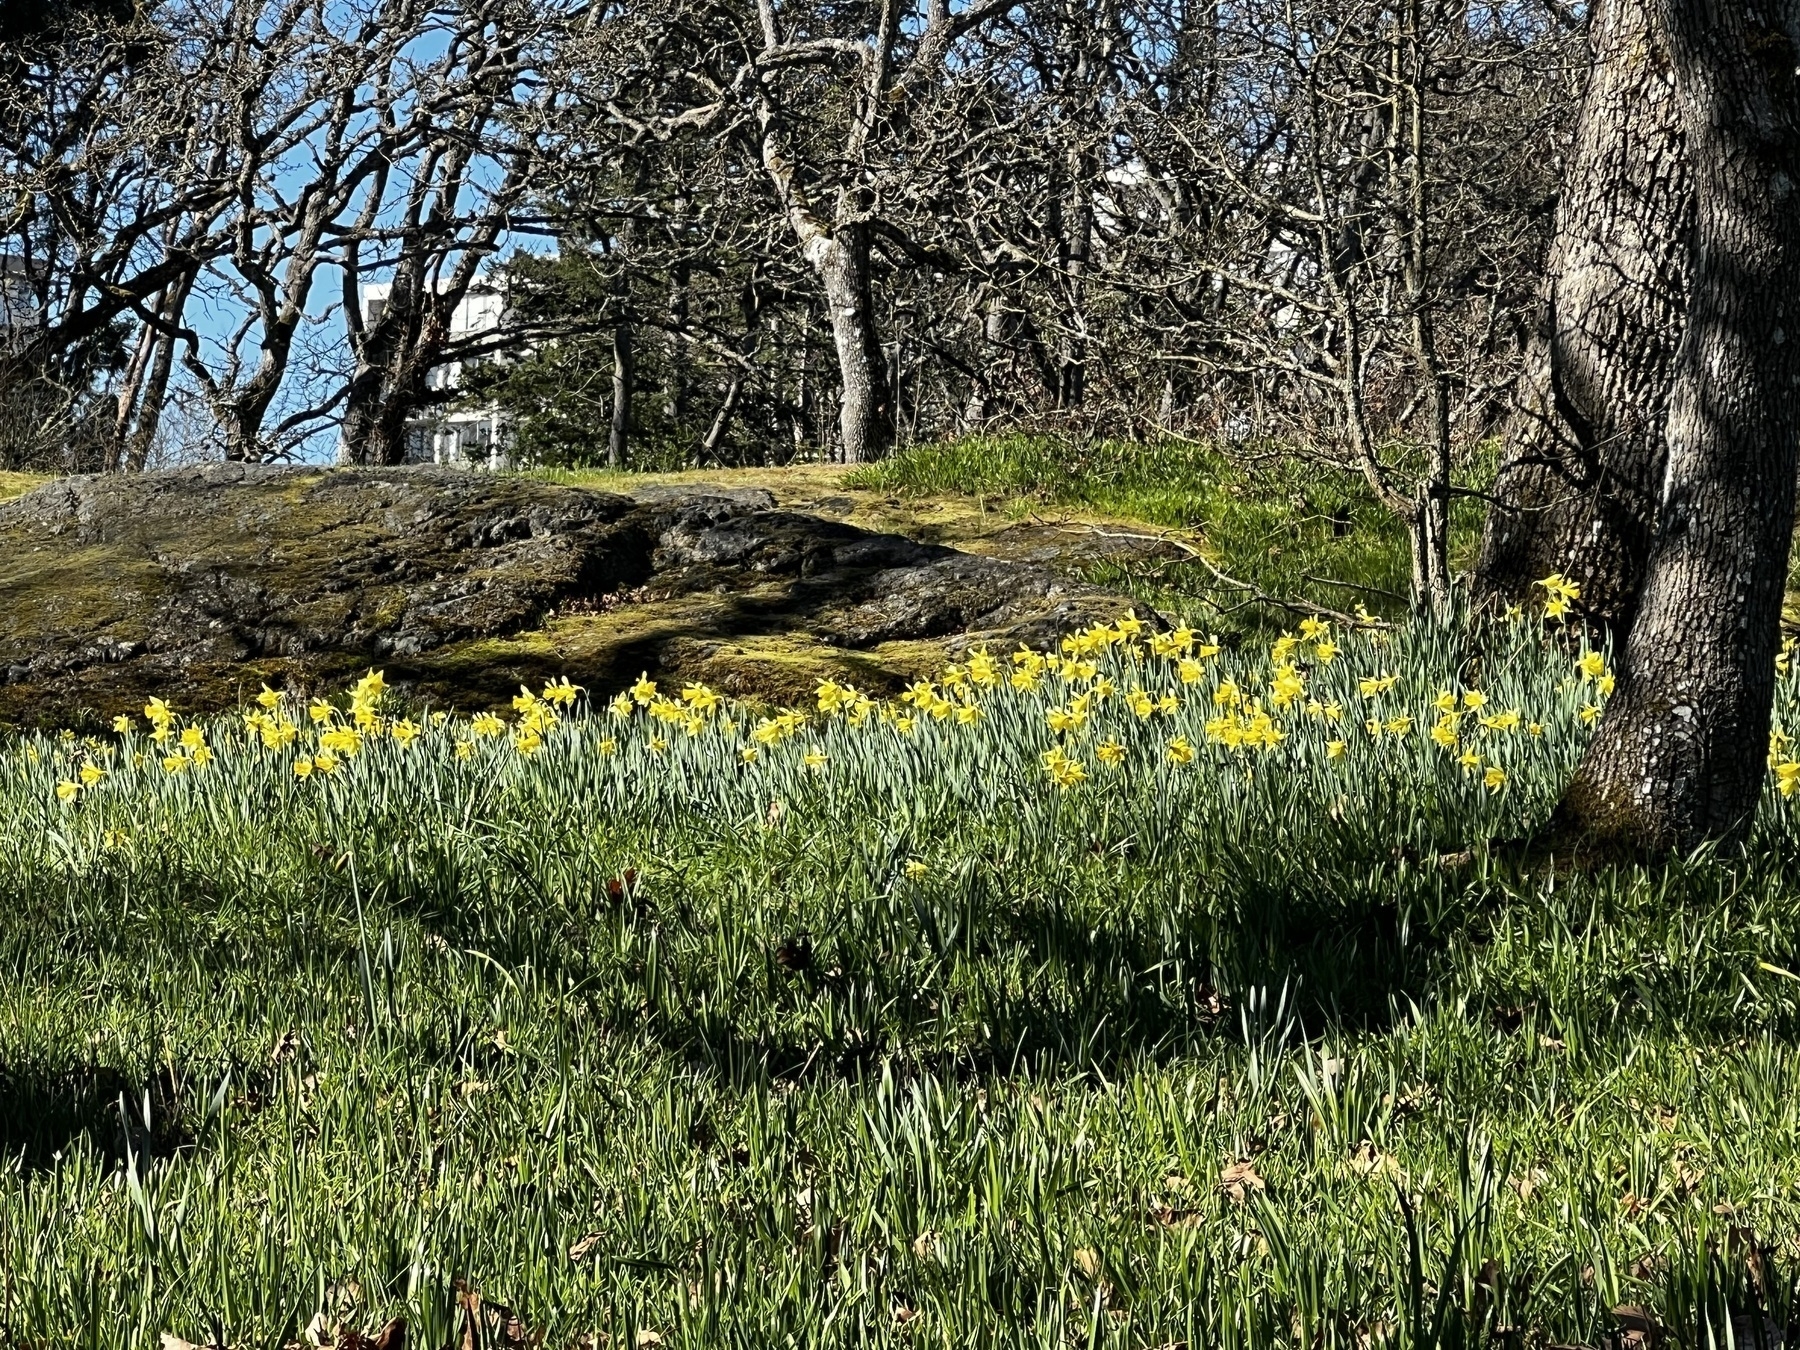 Shot of a small rise, trees on the top of the low slope and yellow flowers blossoming in a line in the foreground, leading from the left edge to a tree trunk on the right.